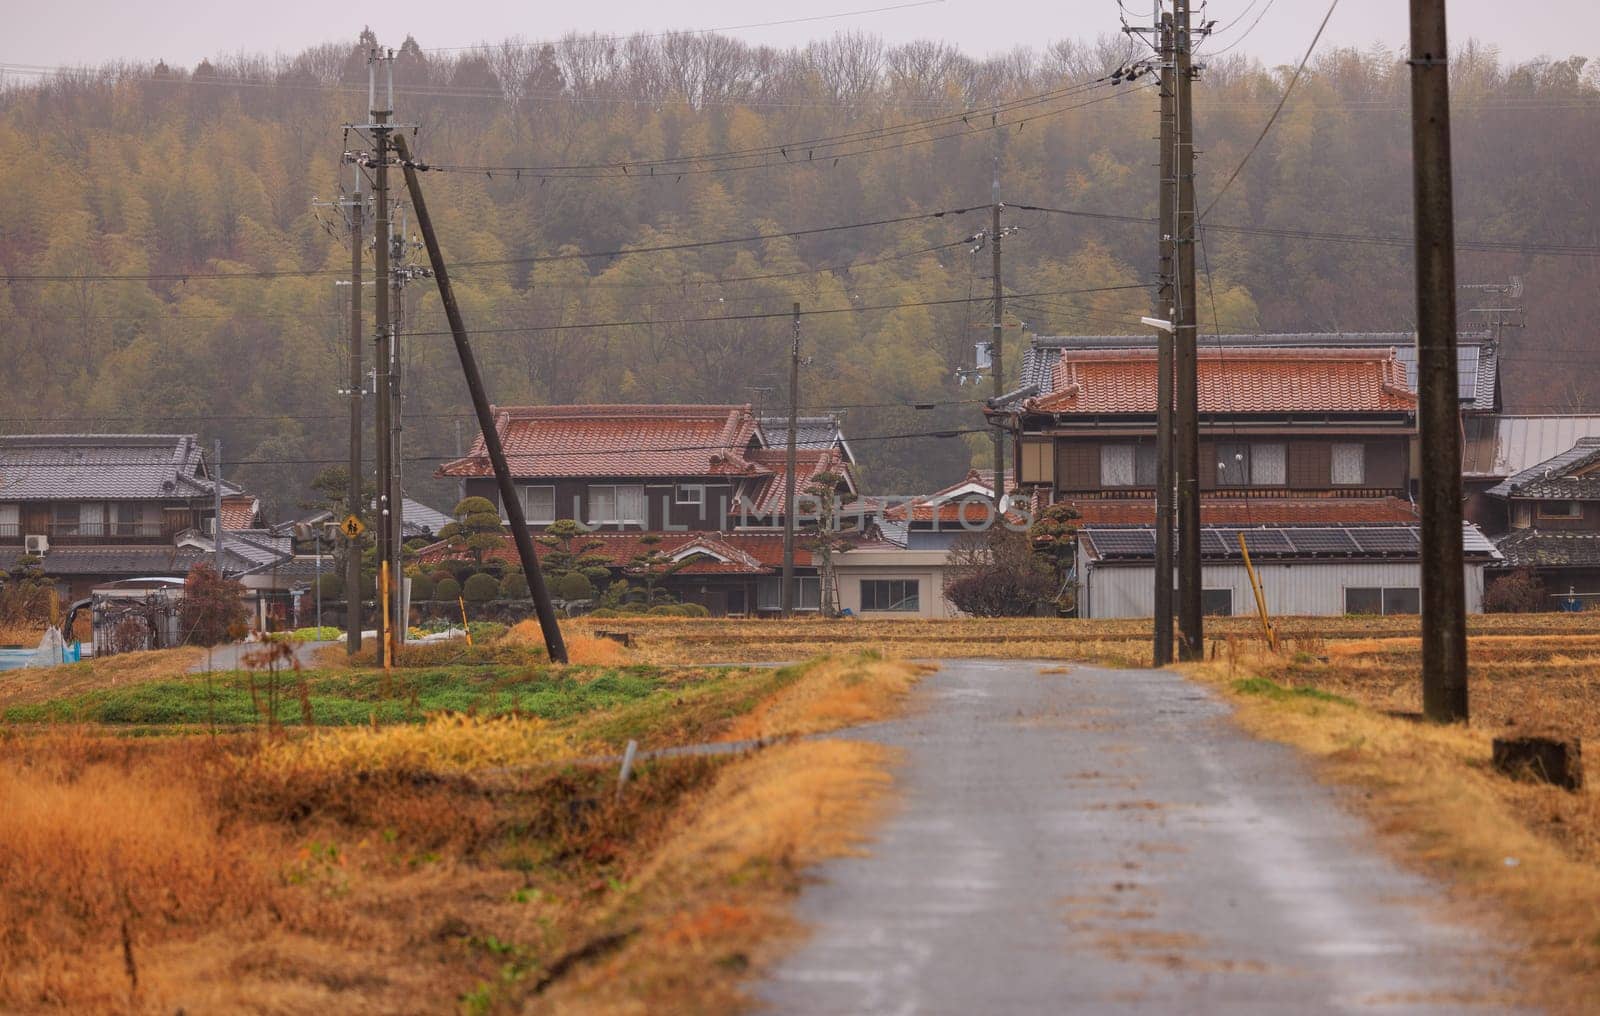 Traditional Japanese Houses next to Golden Fields on Rainy Winter Day. High quality photo